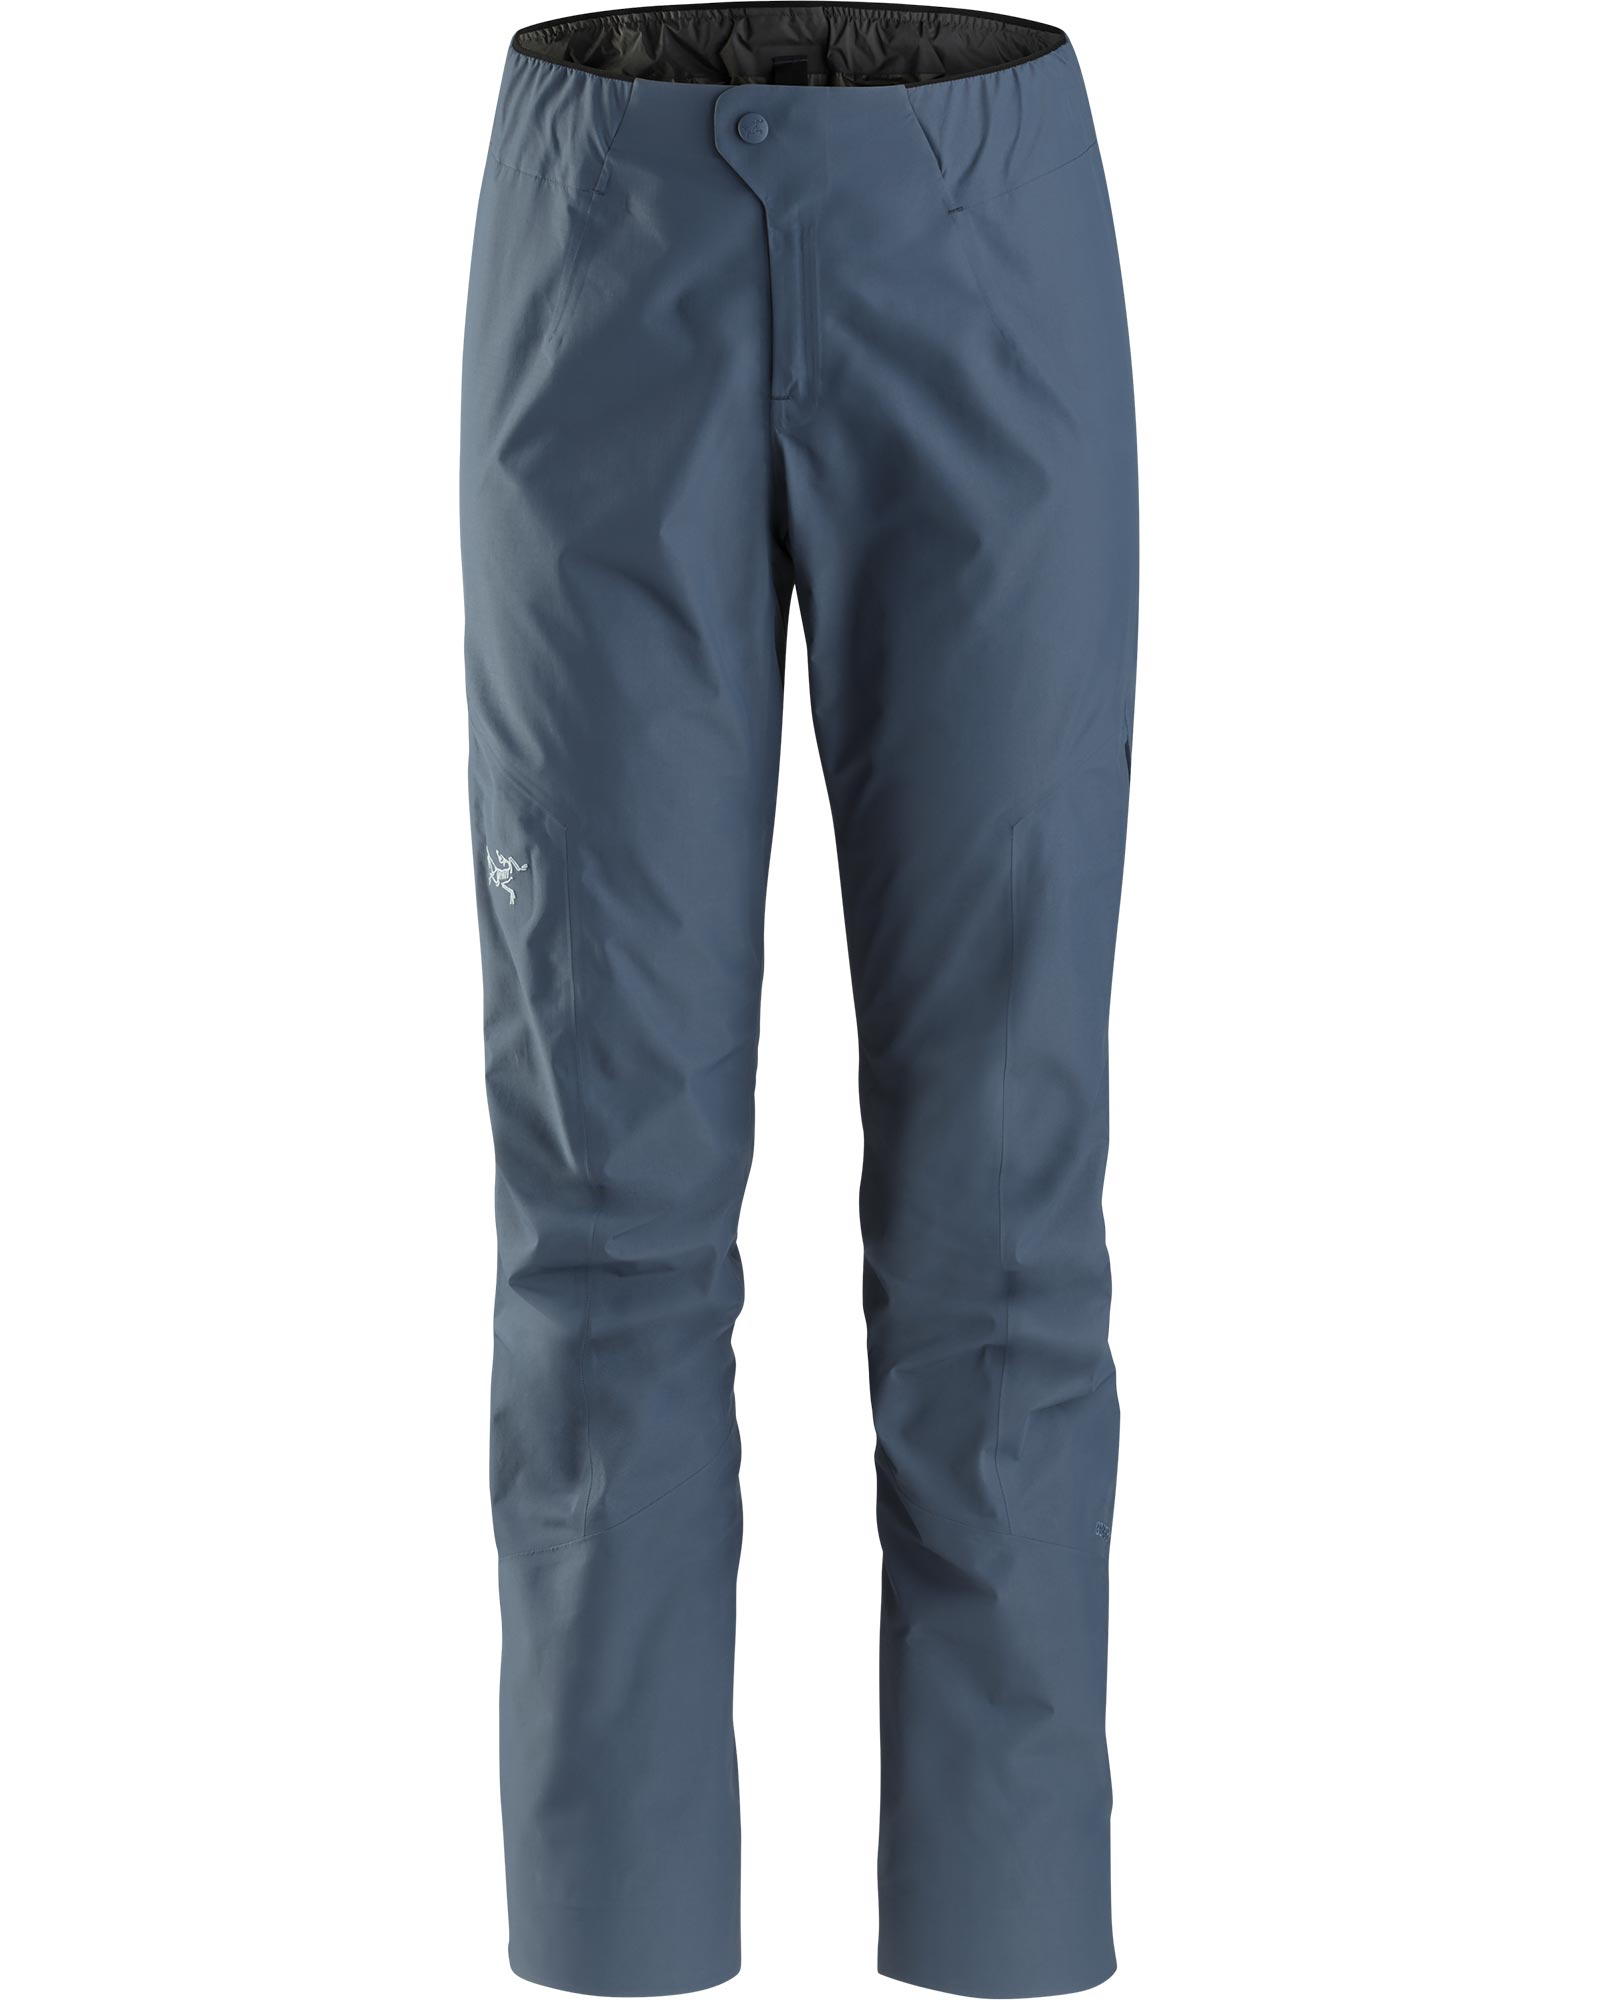 Buy Arcteryx Gamma Mx Pant Womens from Outnorth